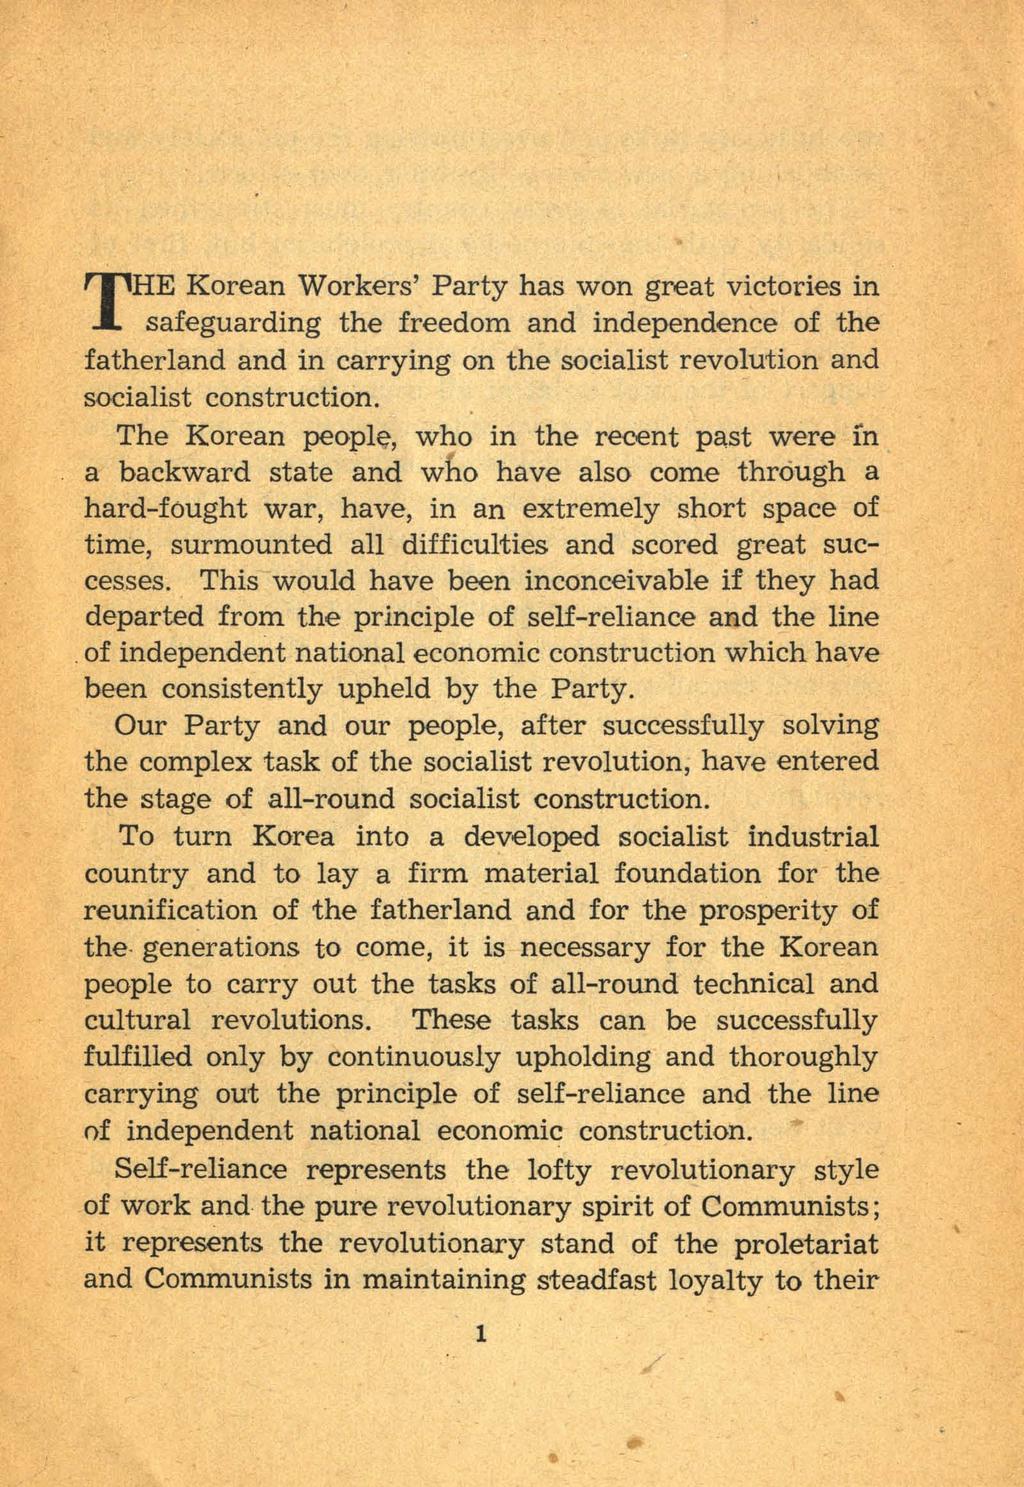 THE Korean Workers' Party has won great victories in safeguarding the freedom and independence of the fatherland and in carrying on the socialist revolution and socialist construction.